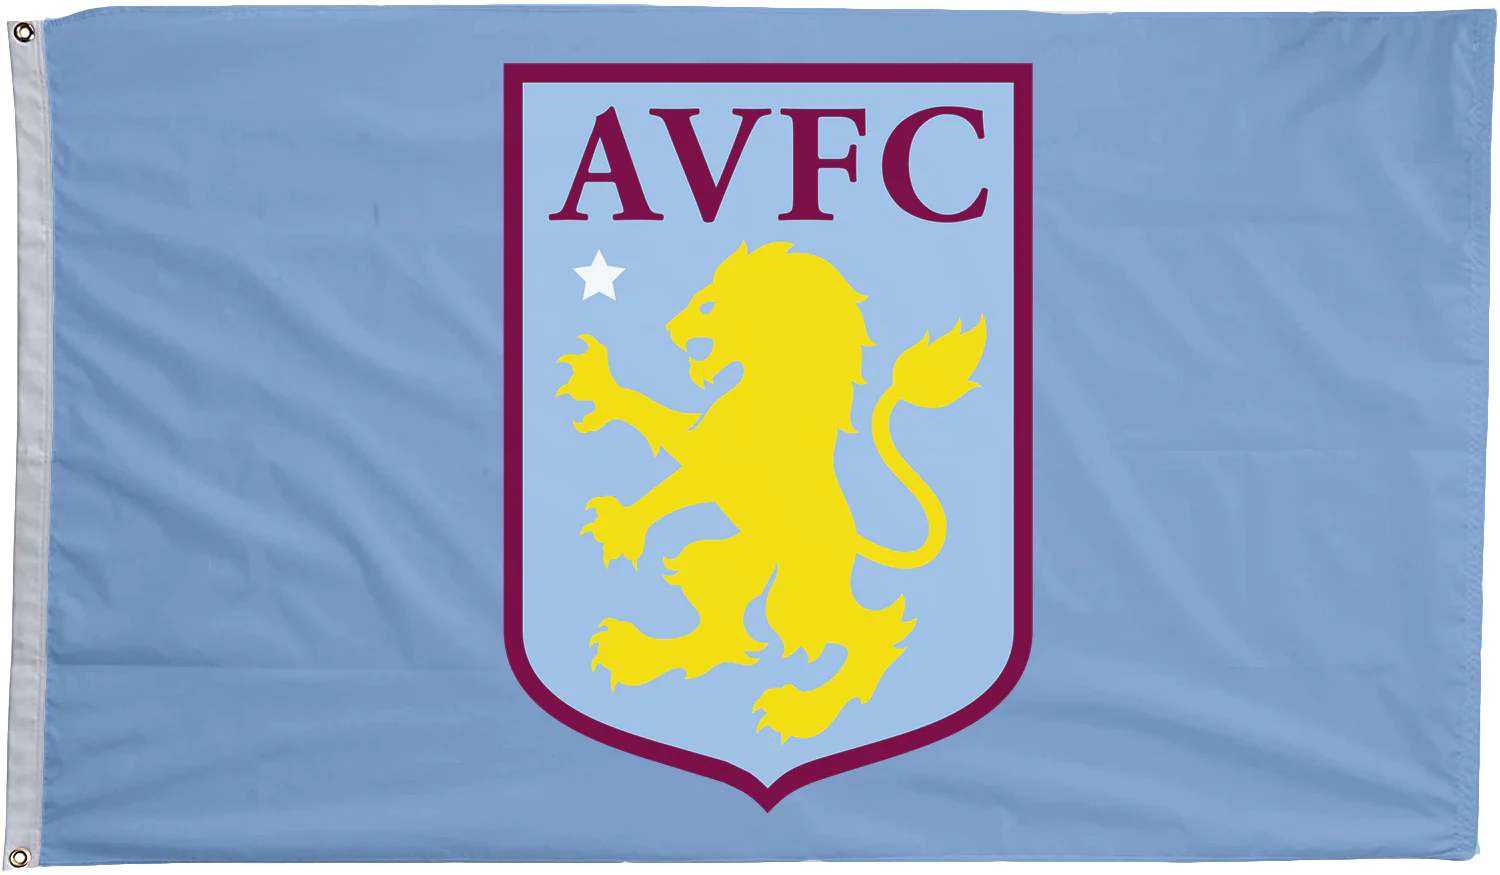 £2m player may regret bouncing aston villa in January as relegation hits new club